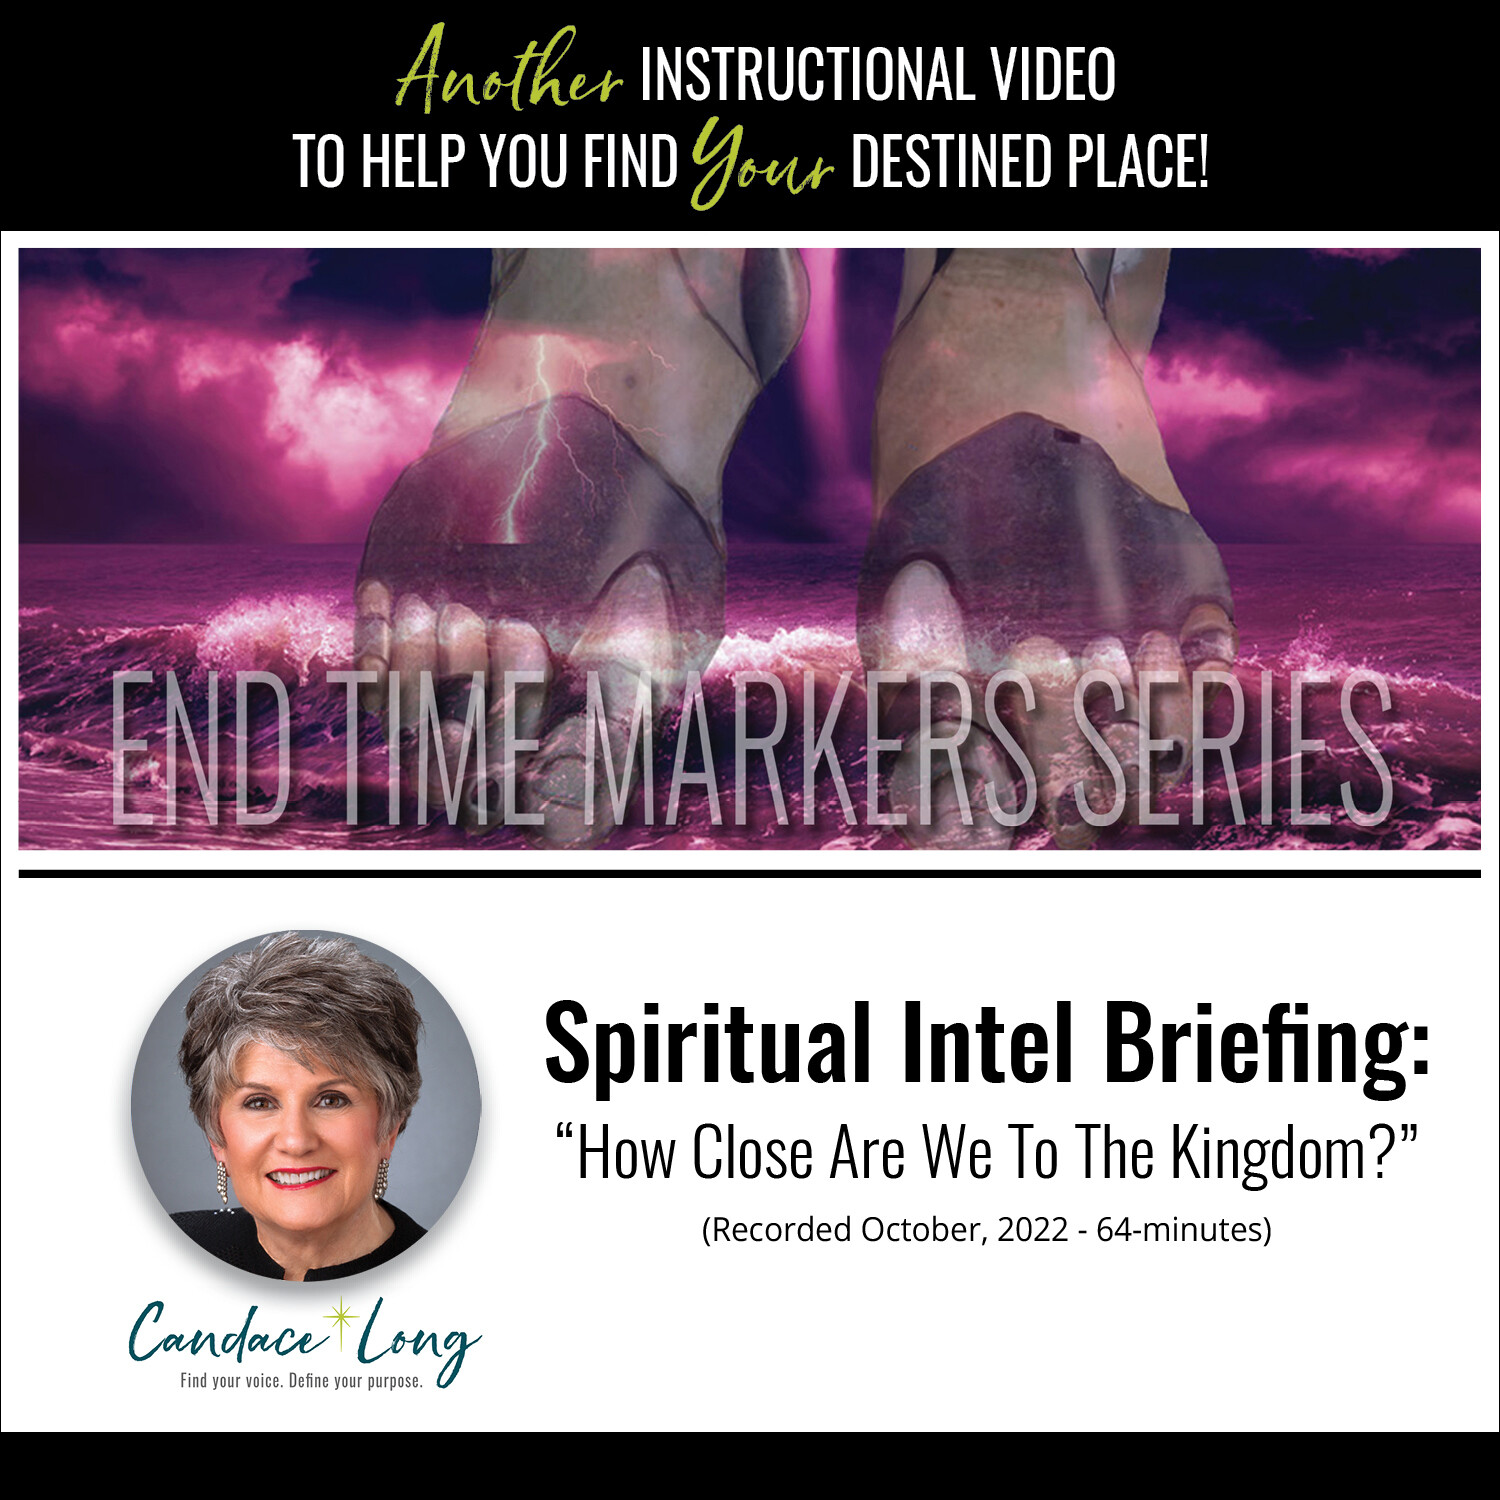 Spiritual Intel Briefing: How Close Are We To The Kingdom?